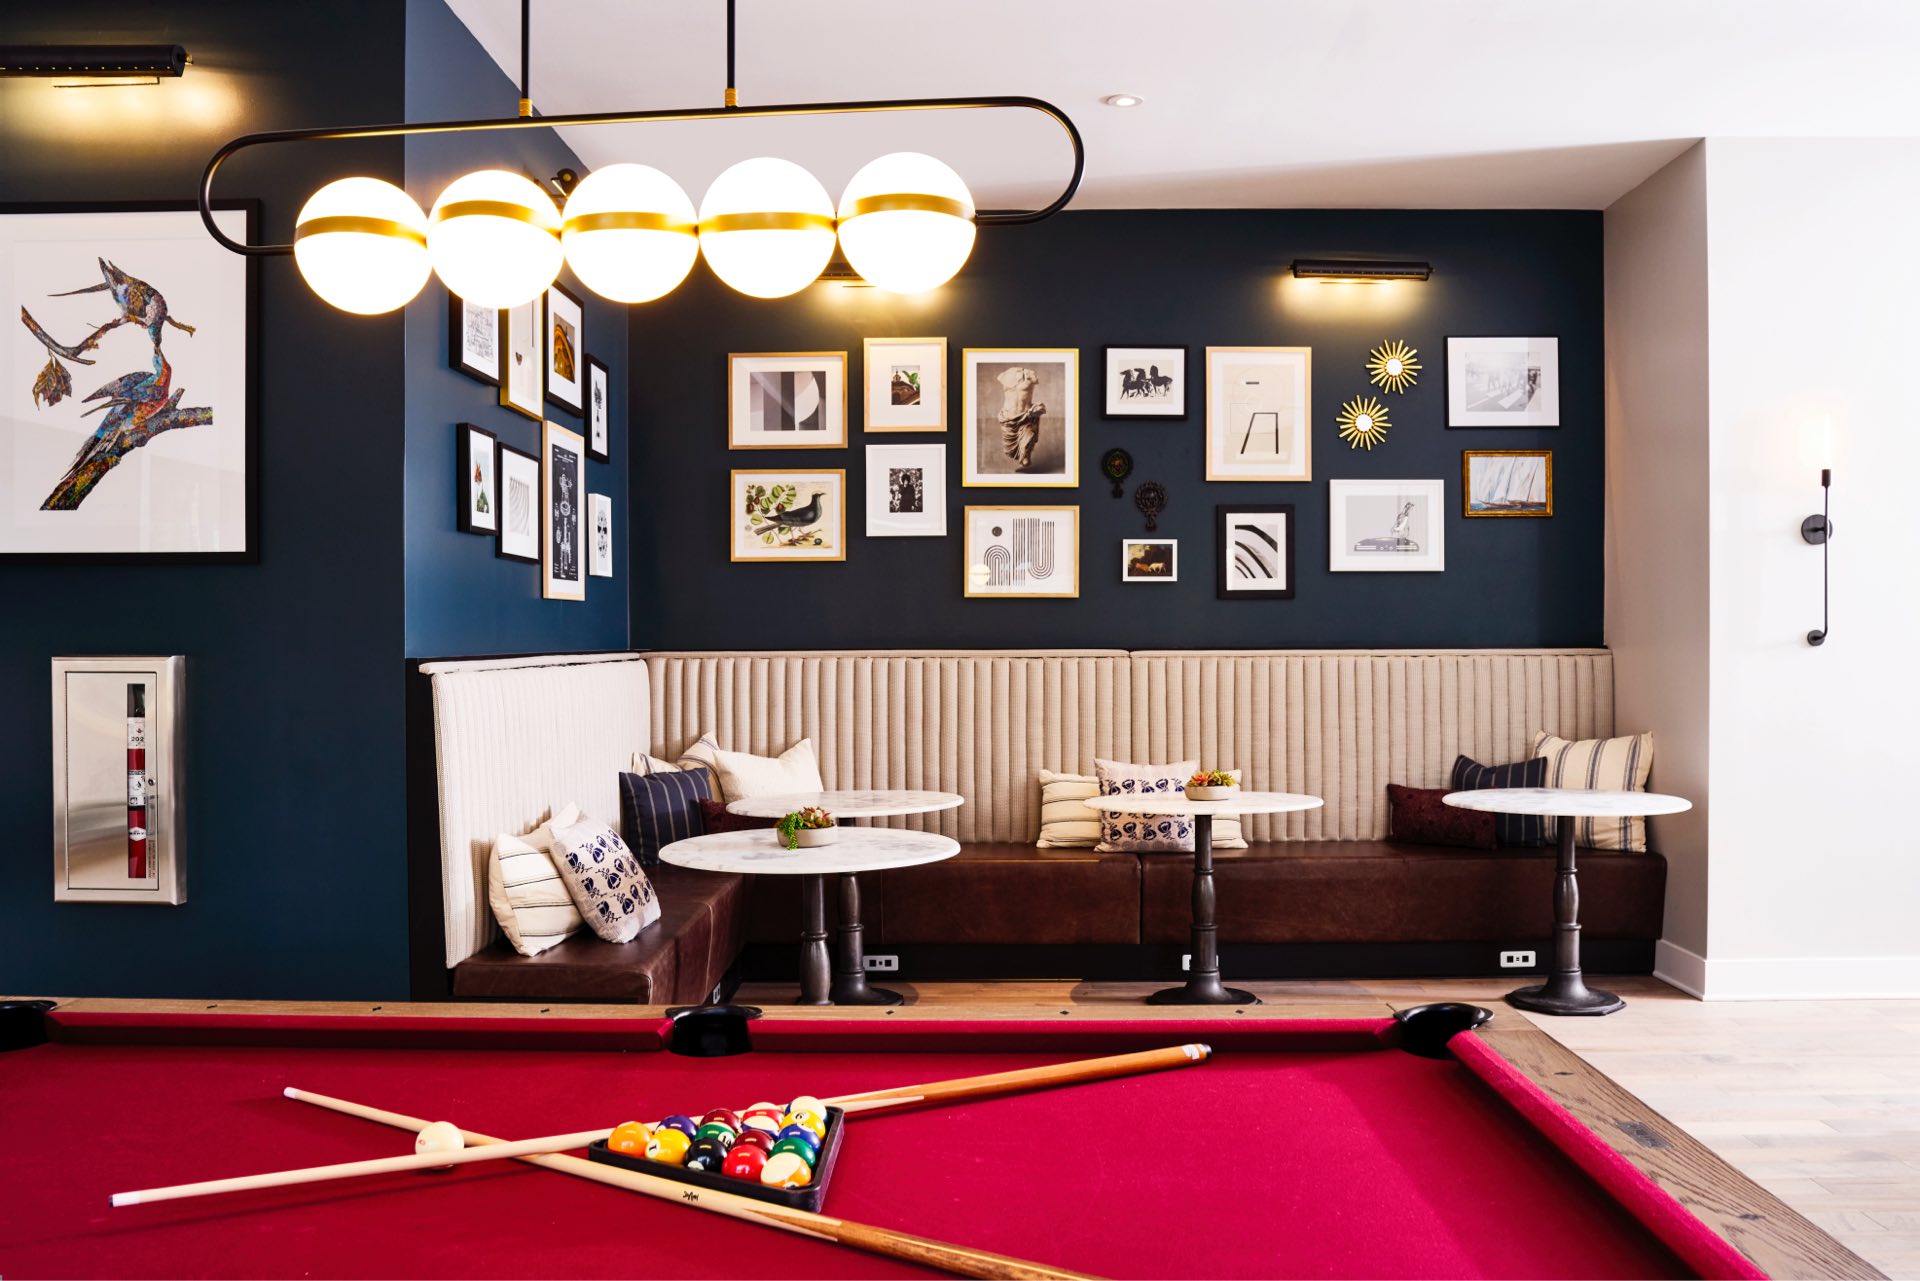 Comfy banquette seating and billiards table 